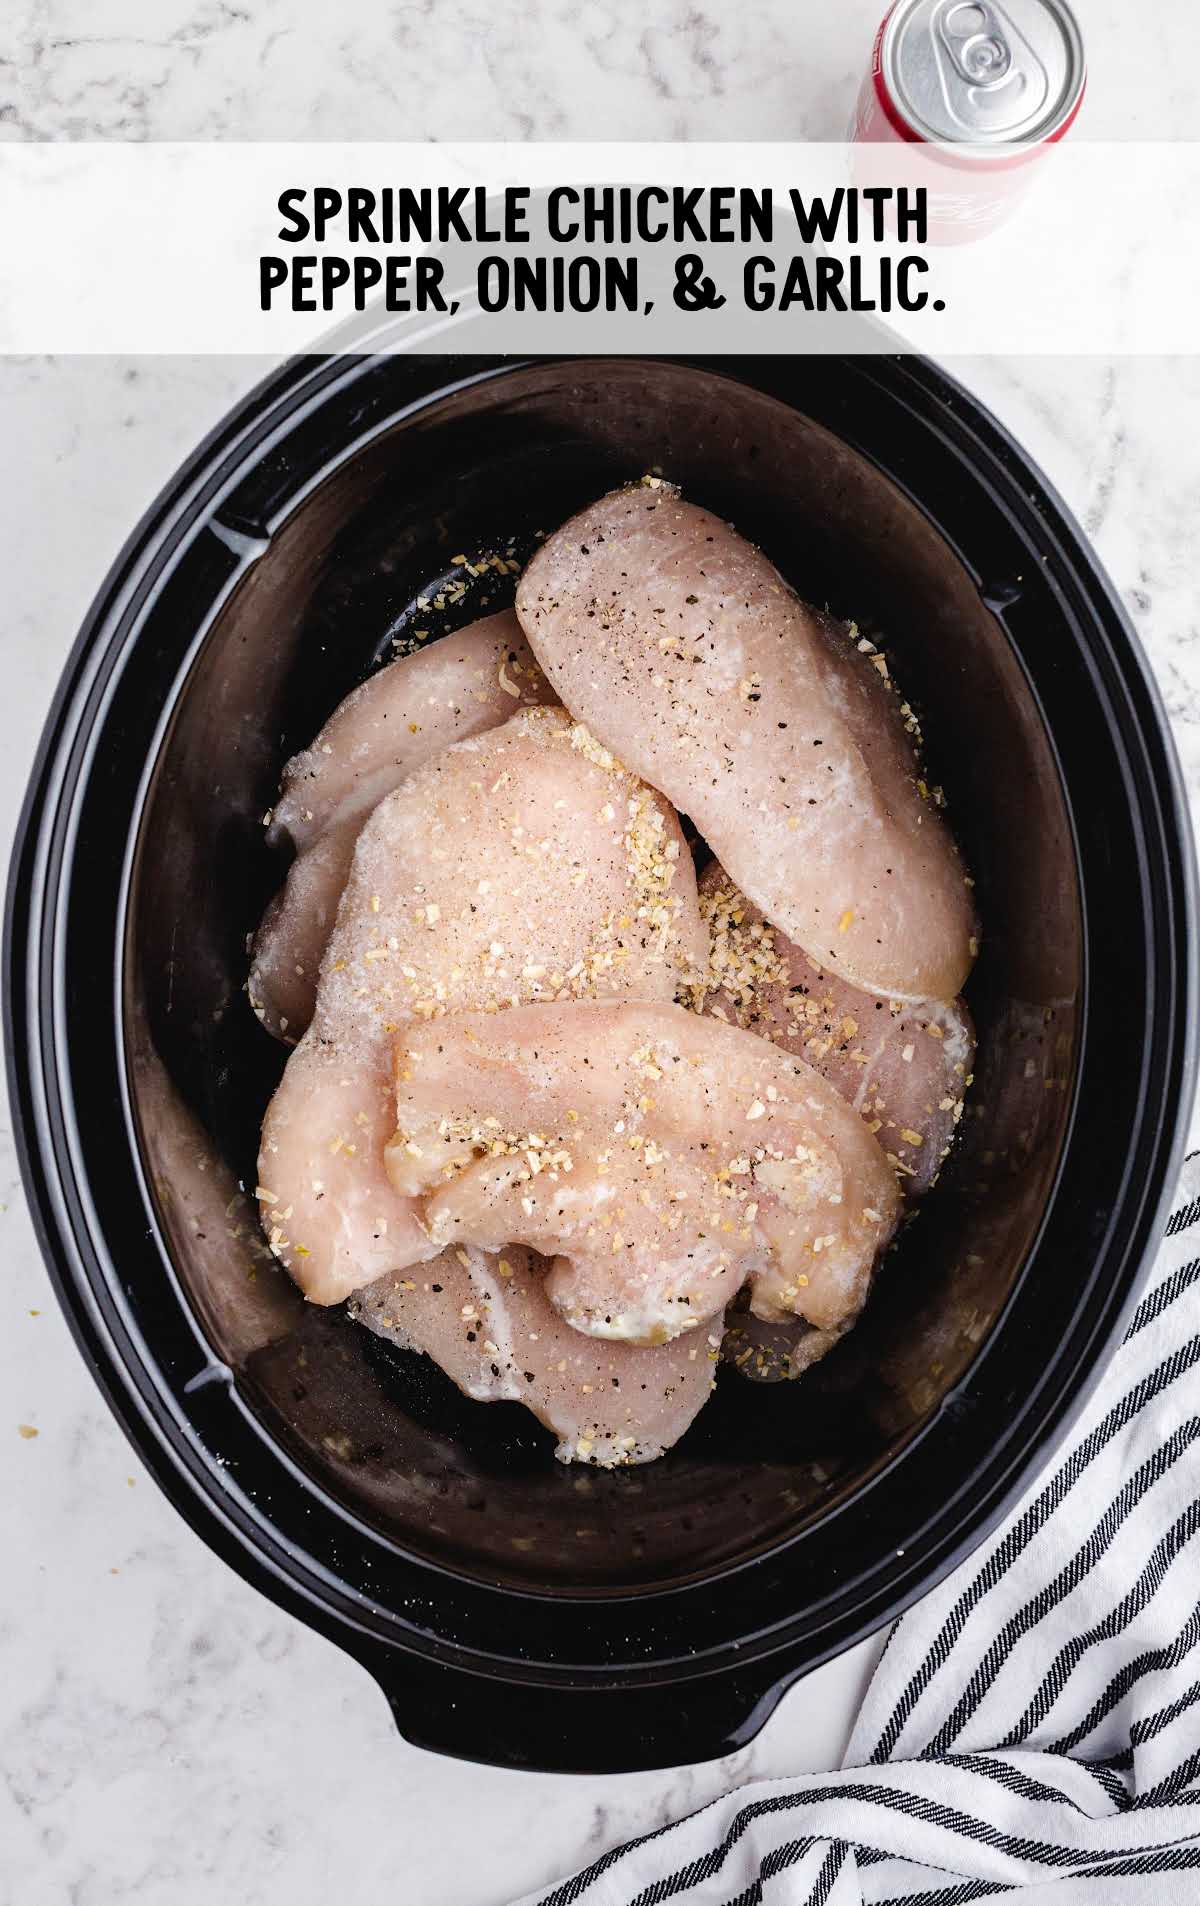 chicken breast sprinkled with pepper, onion, and garlic in a slow cooker